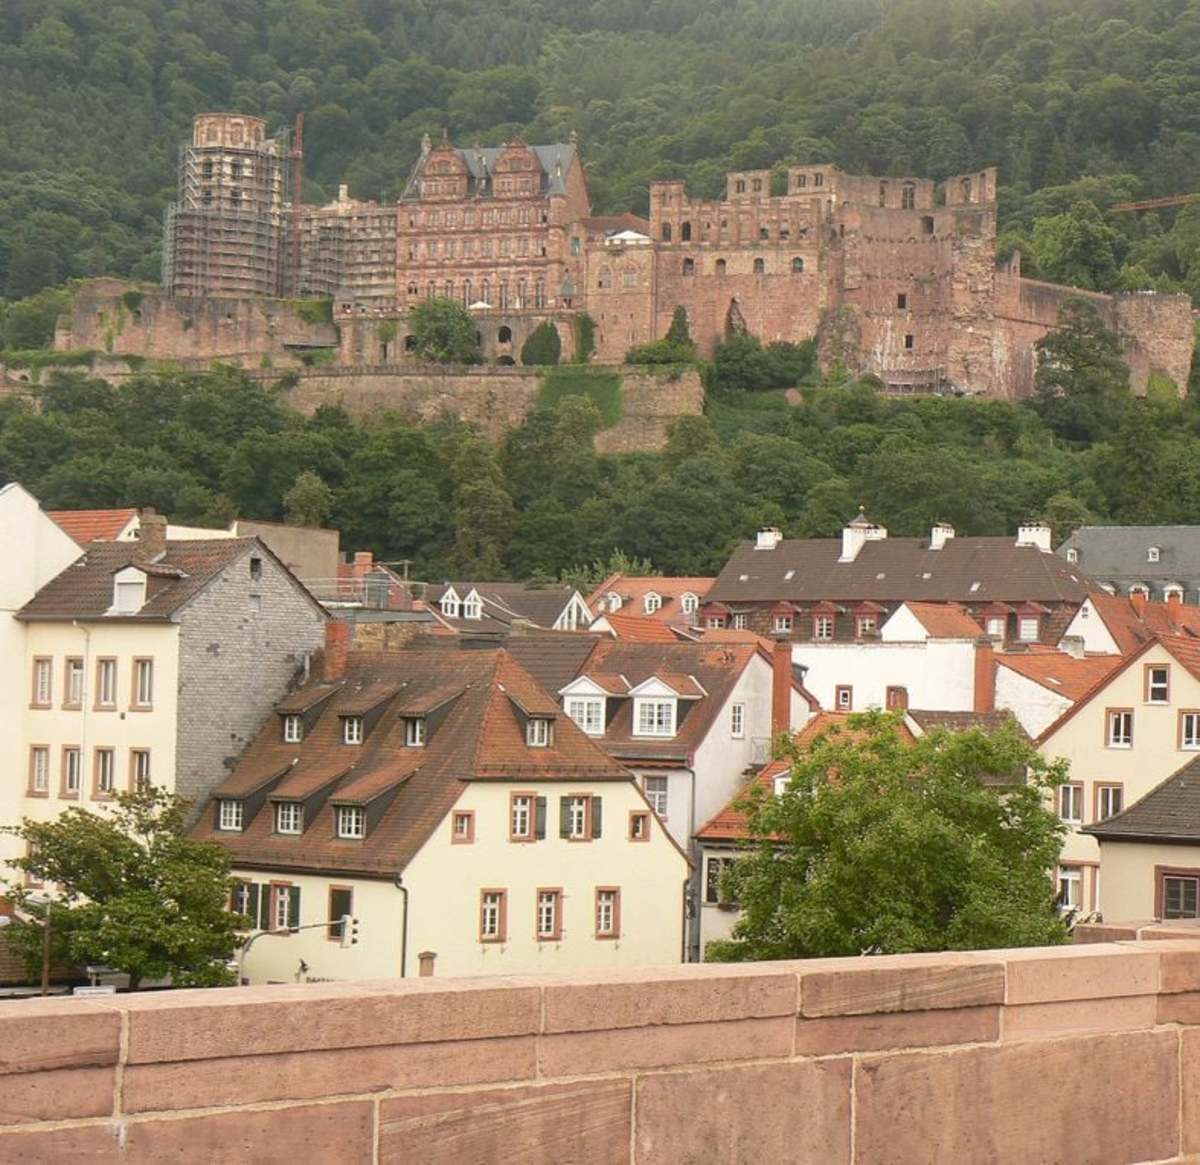 A Rough Guide to Germany : Things to Do in Heidelberg